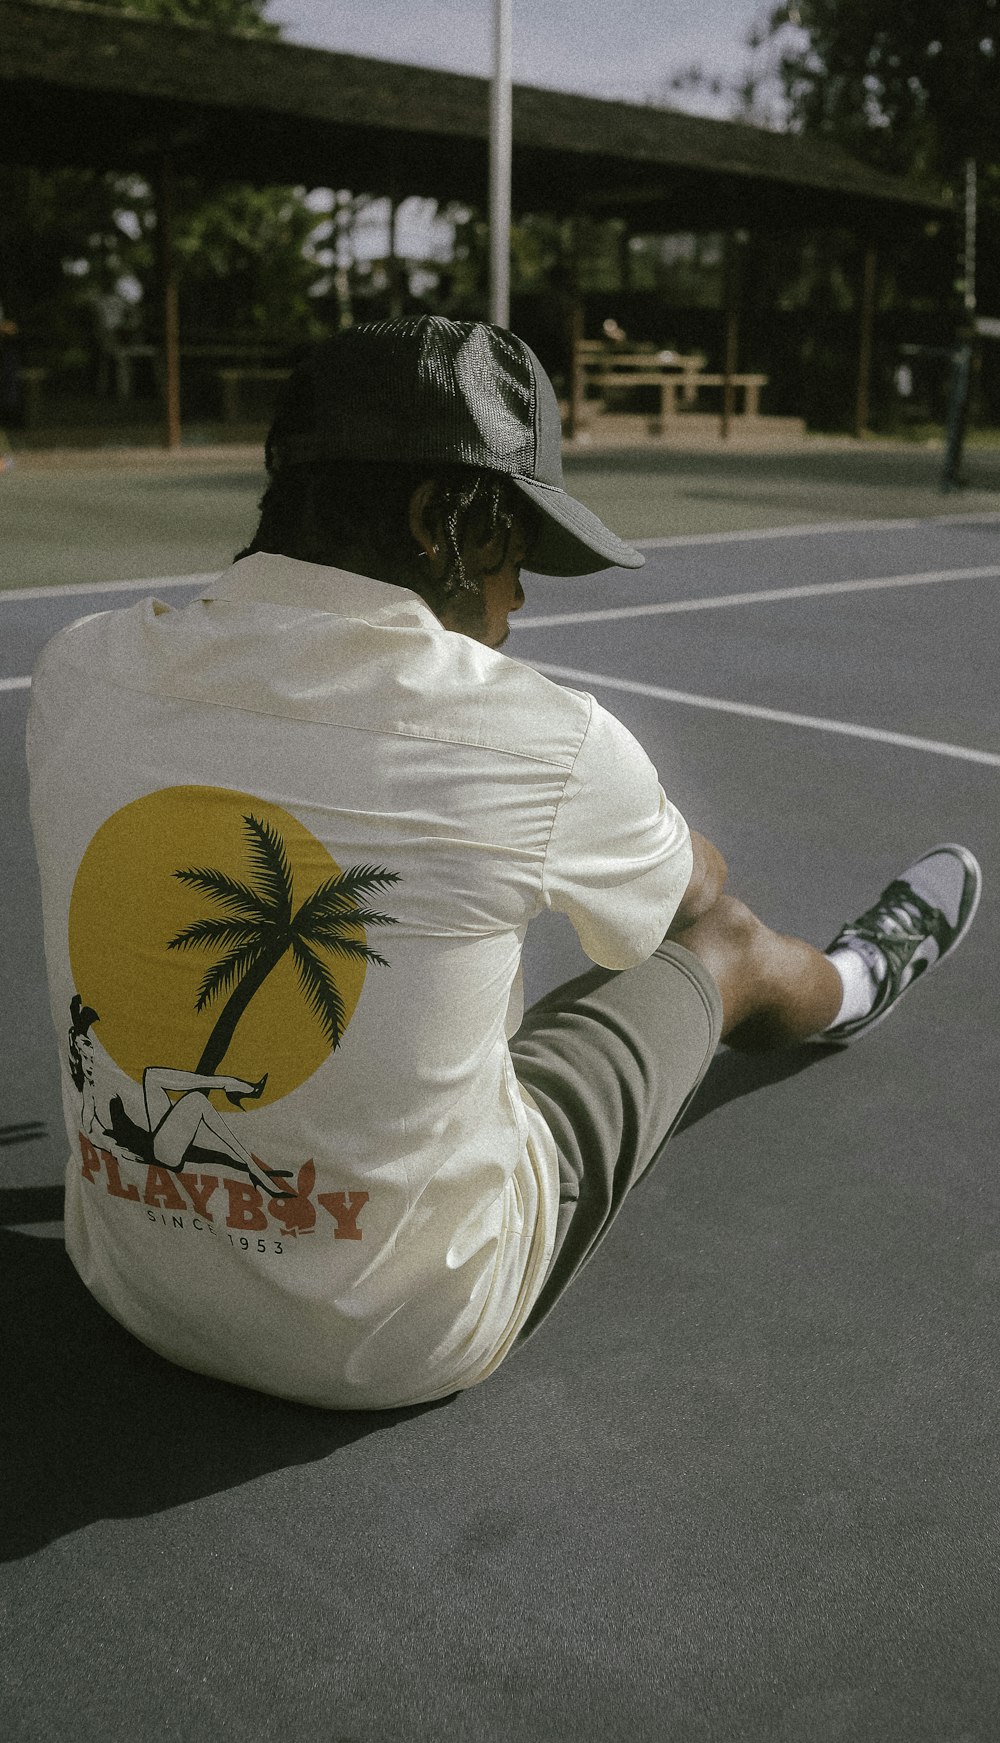 a man sitting on a tennis court wearing a hat